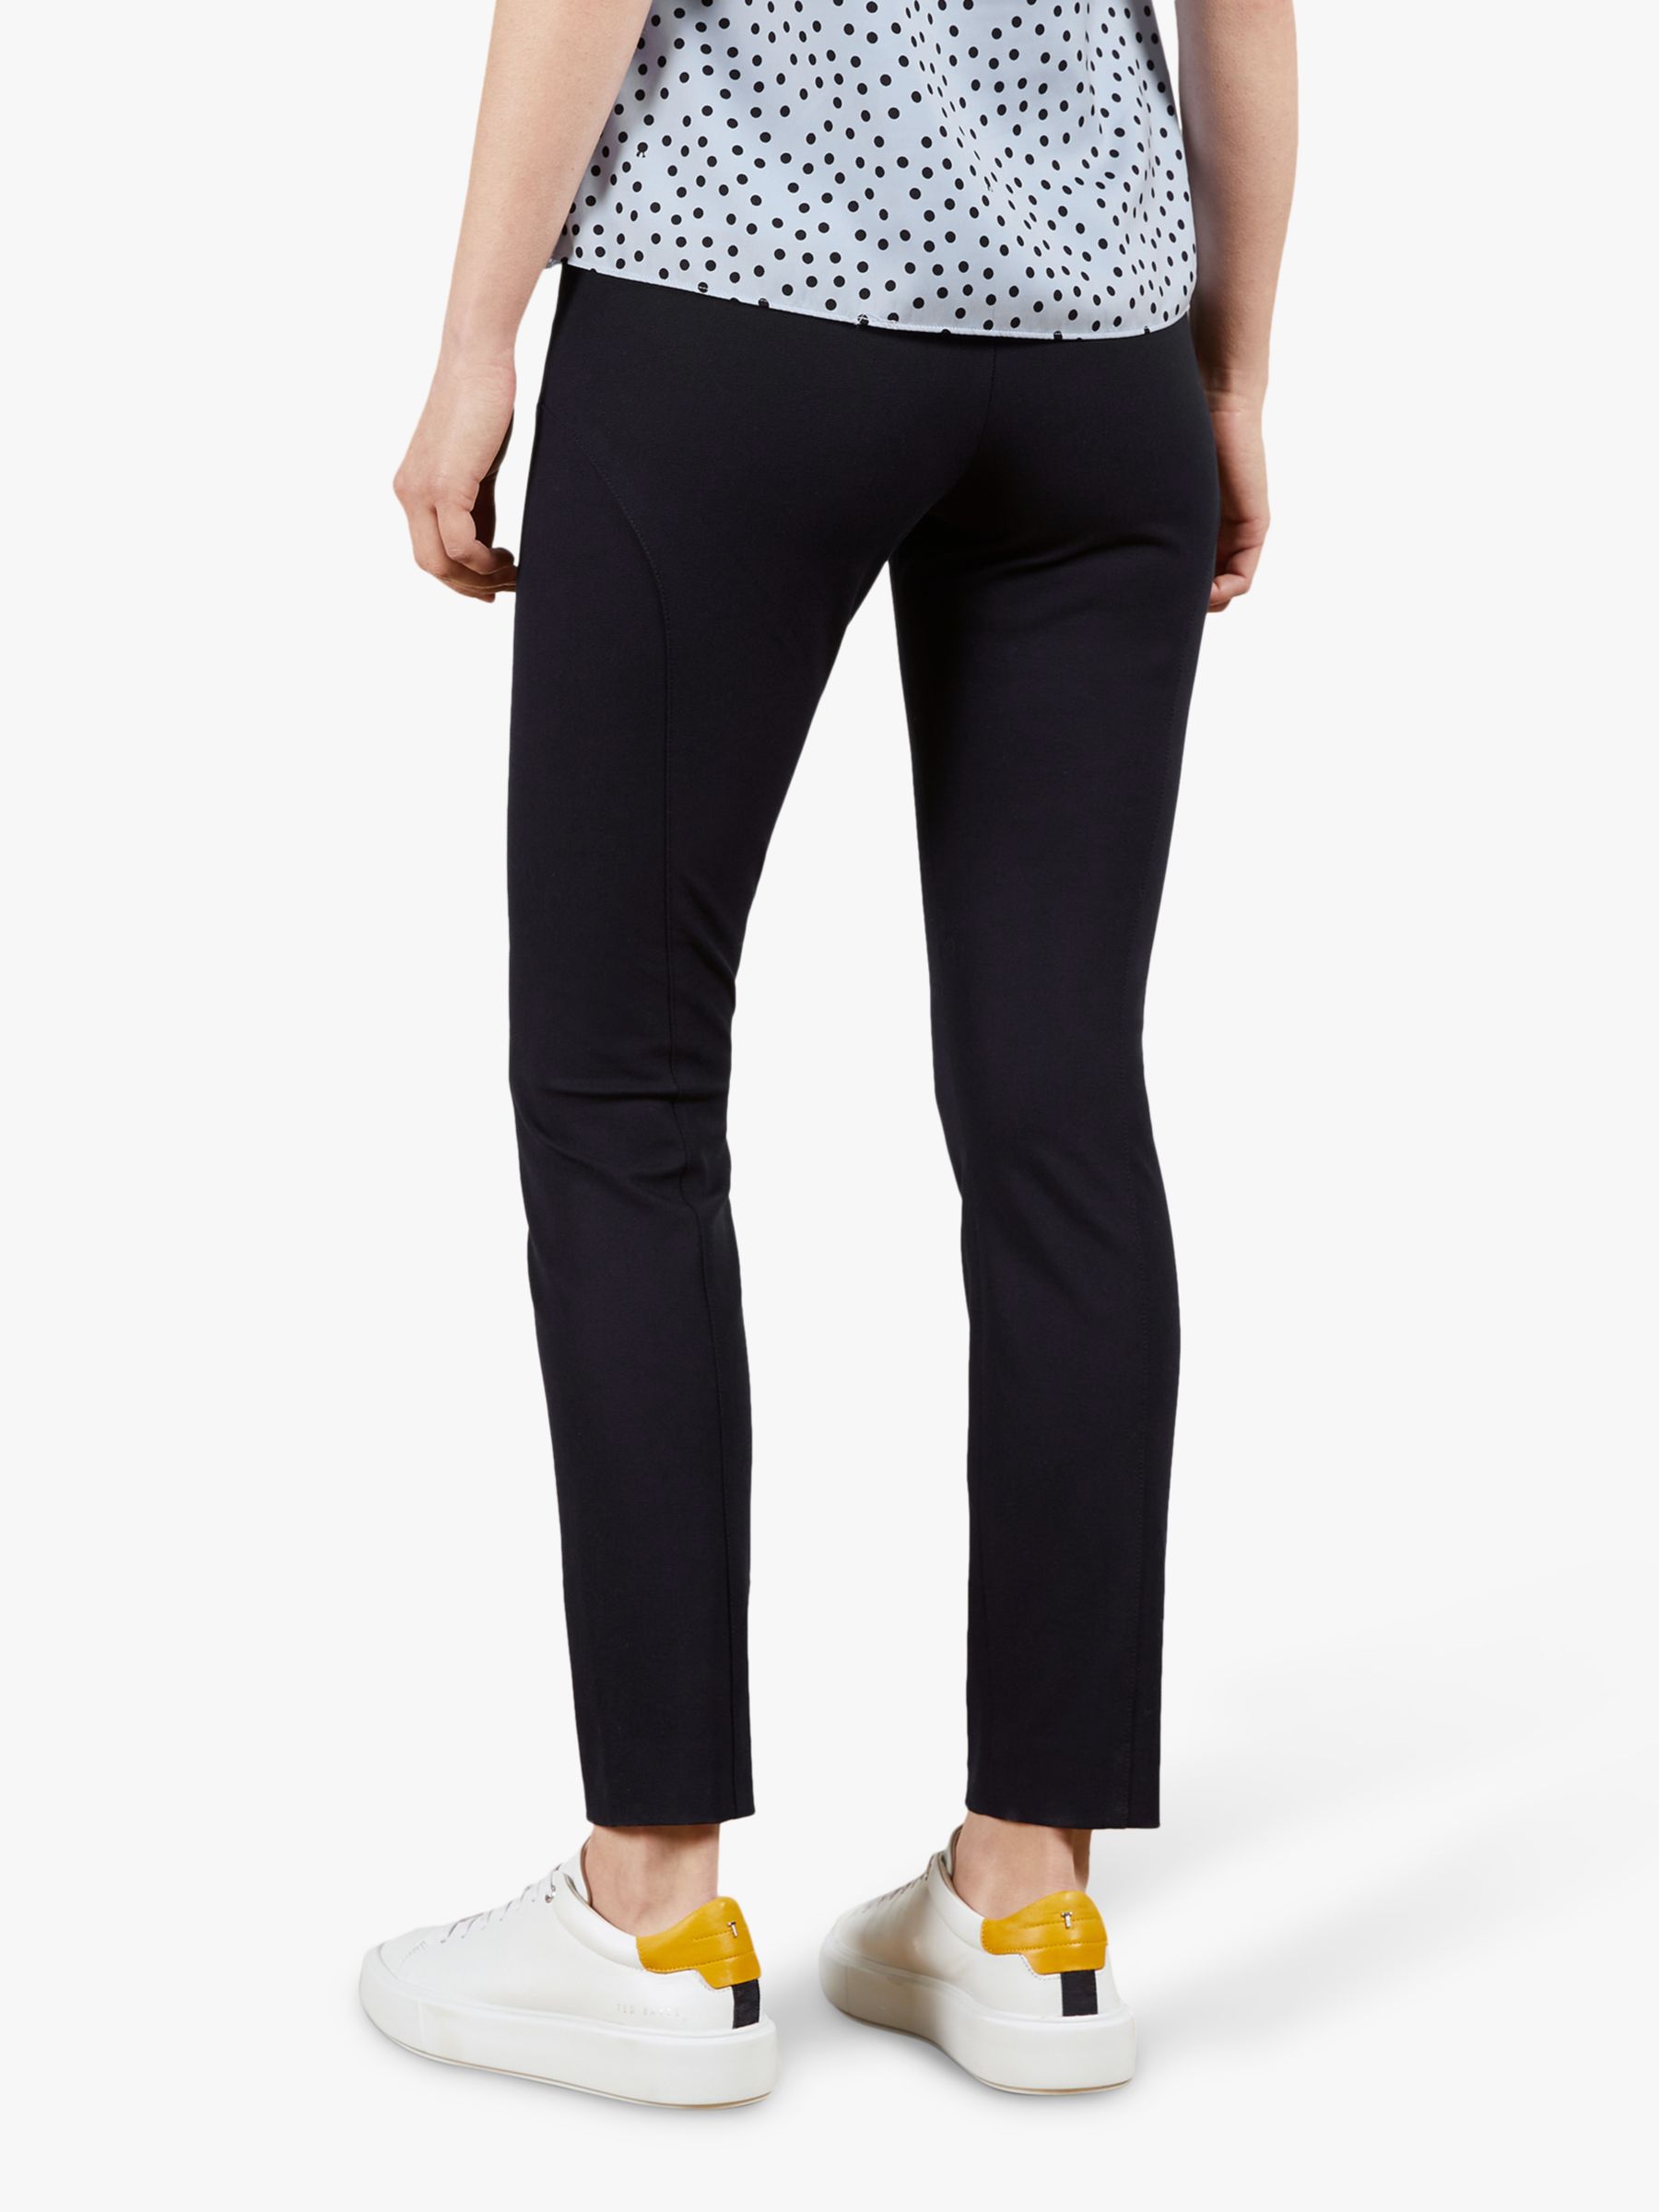 Ted Baker Calya Ankle Grazer Trousers, Navy at John Lewis & Partners